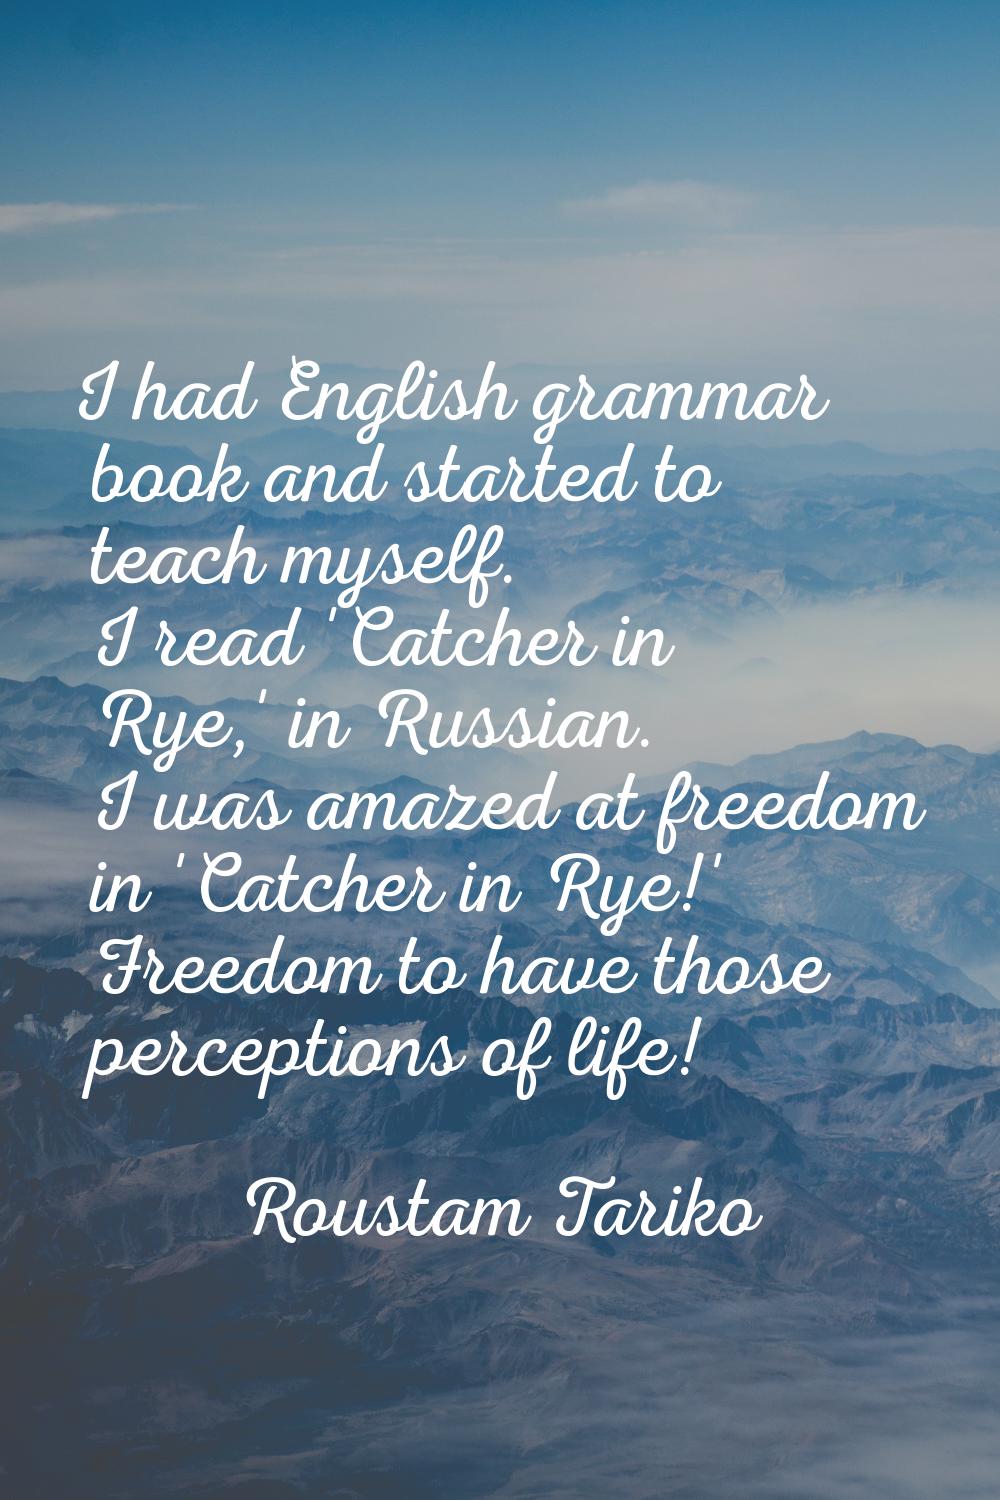 I had English grammar book and started to teach myself. I read 'Catcher in Rye,' in Russian. I was 